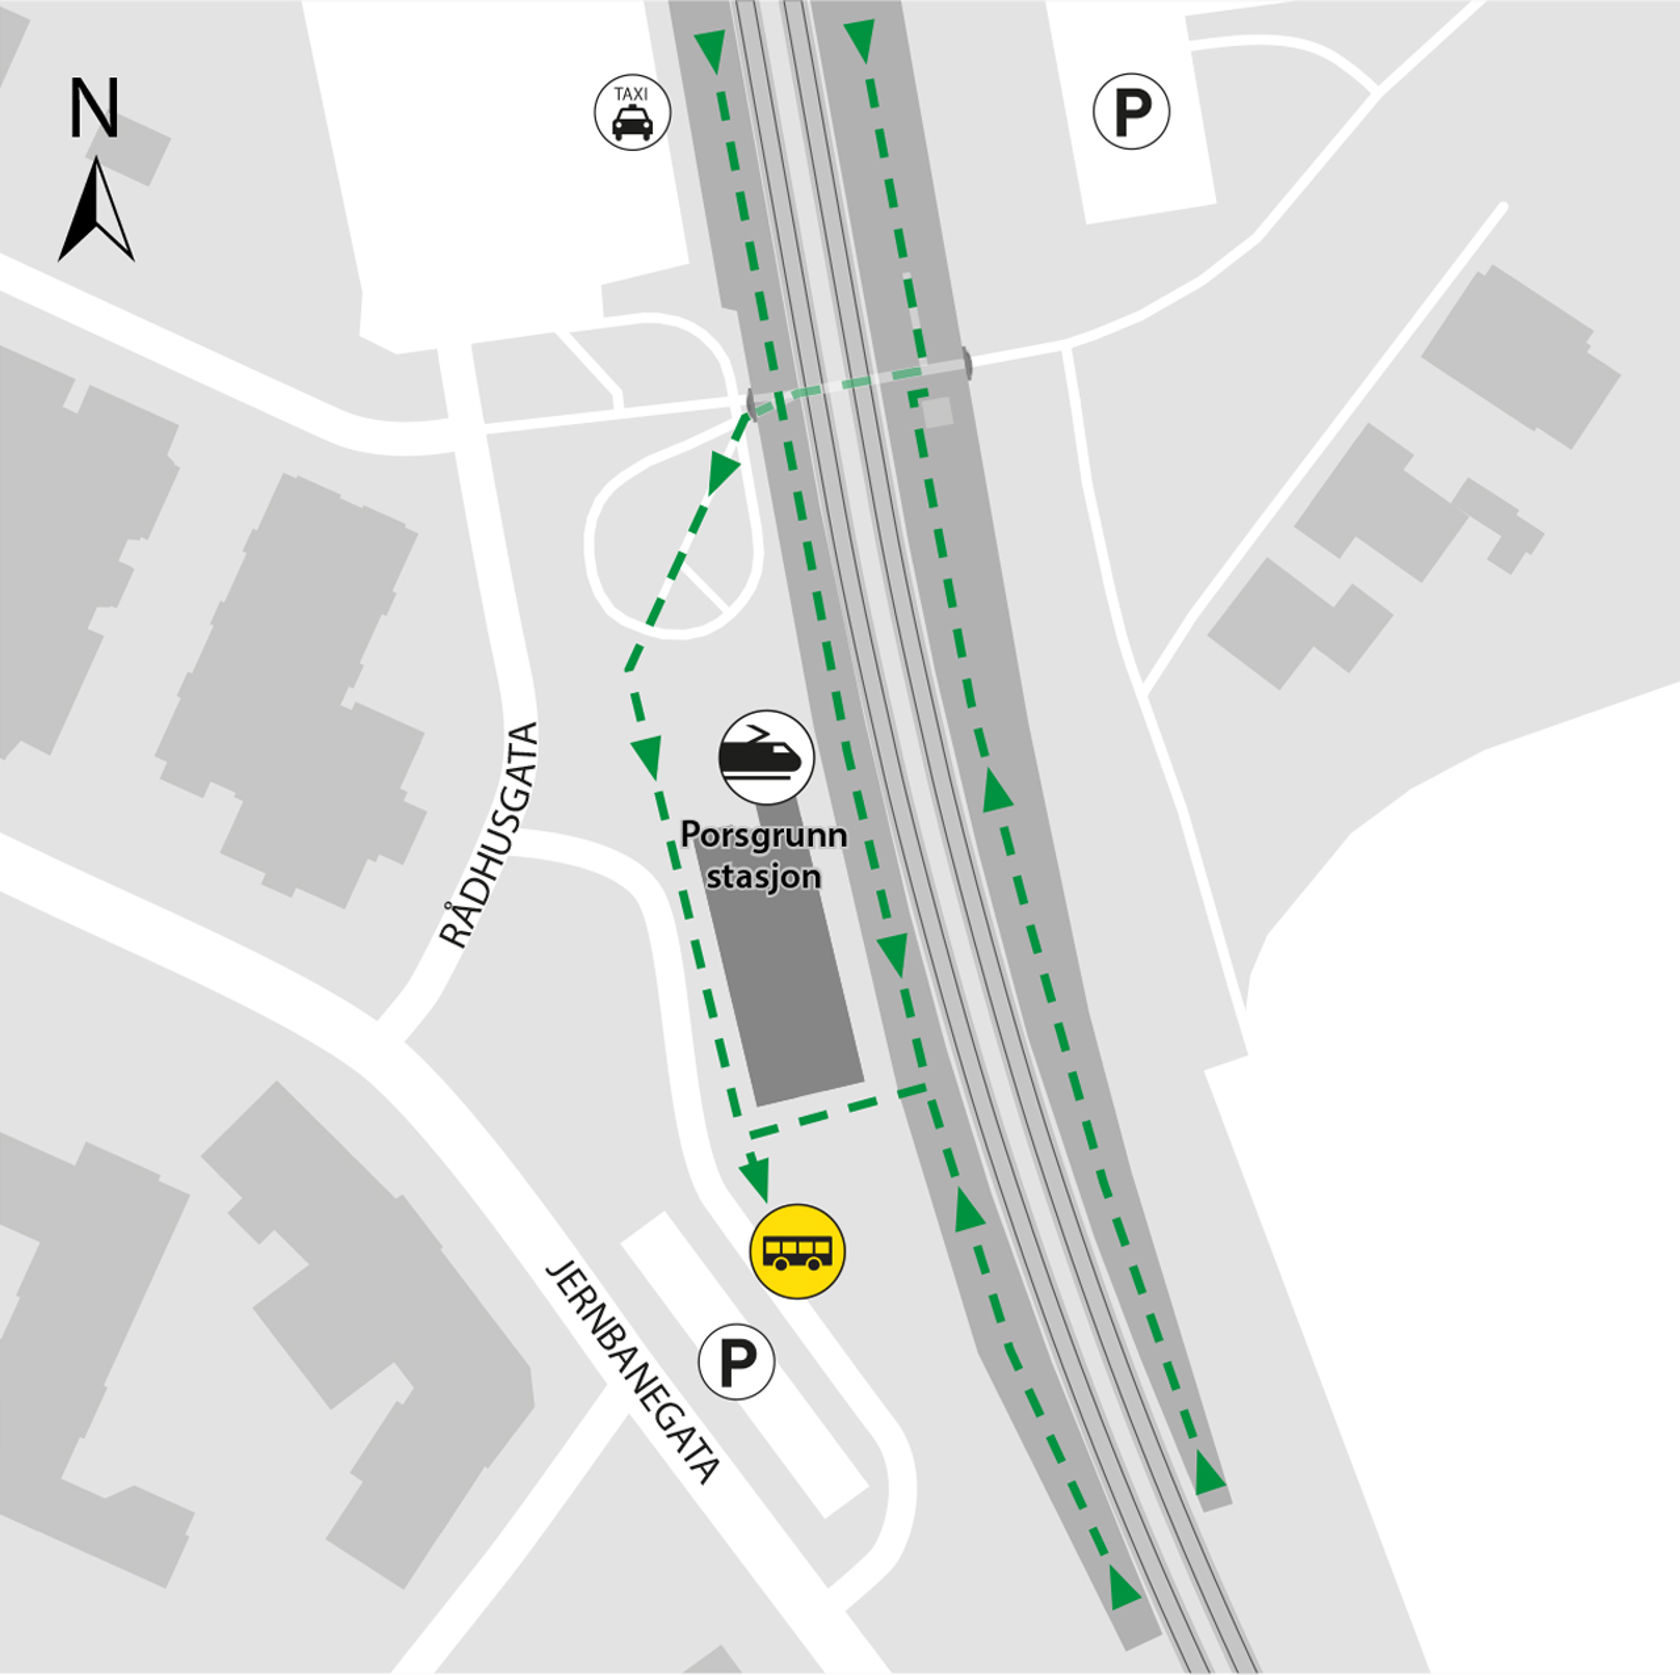 Map shows rail replacement service departs from bus stop in front of Porsgrunn station.